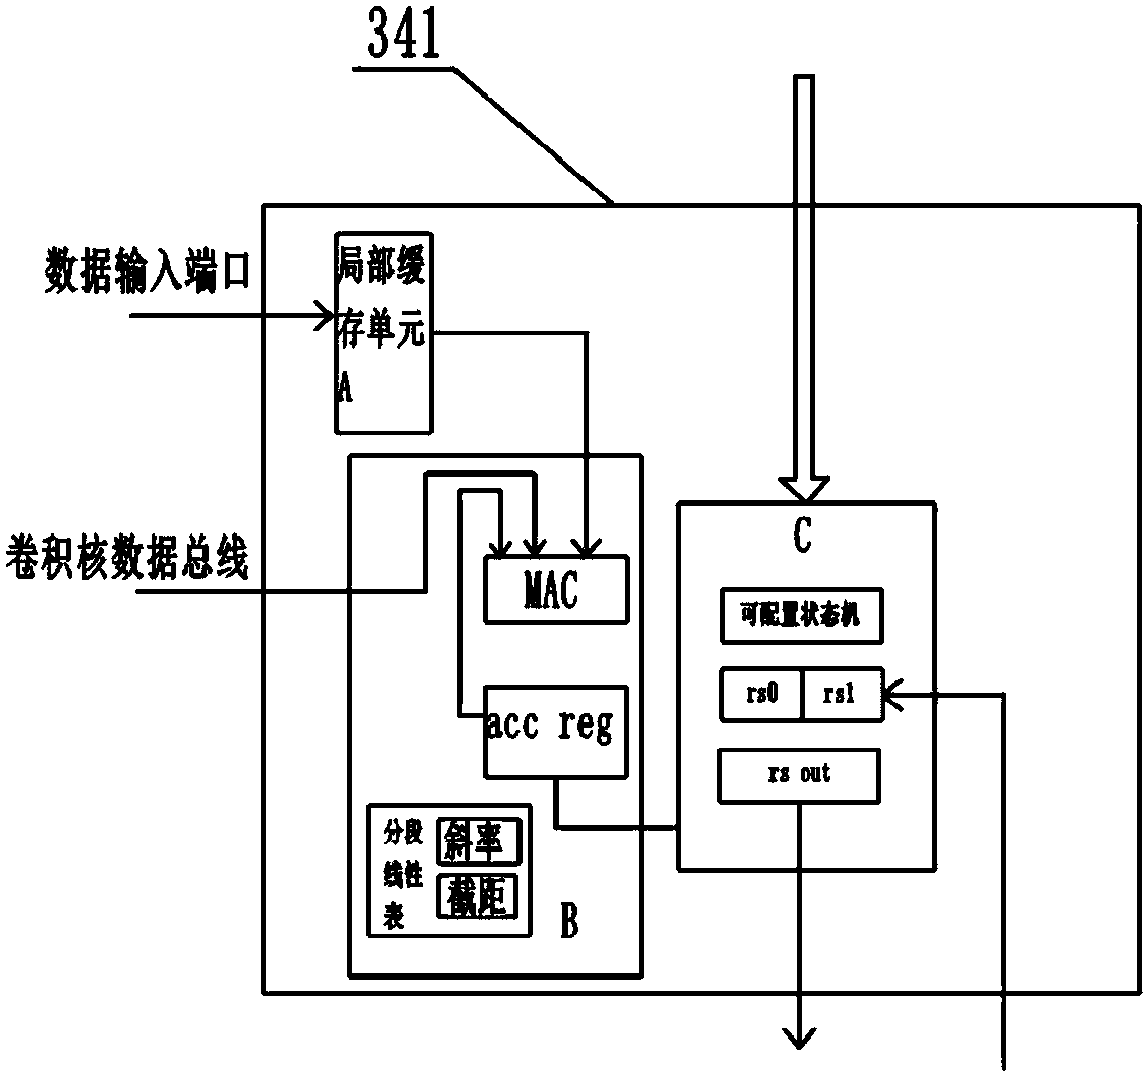 Face recognition system and recognition method based on neural network